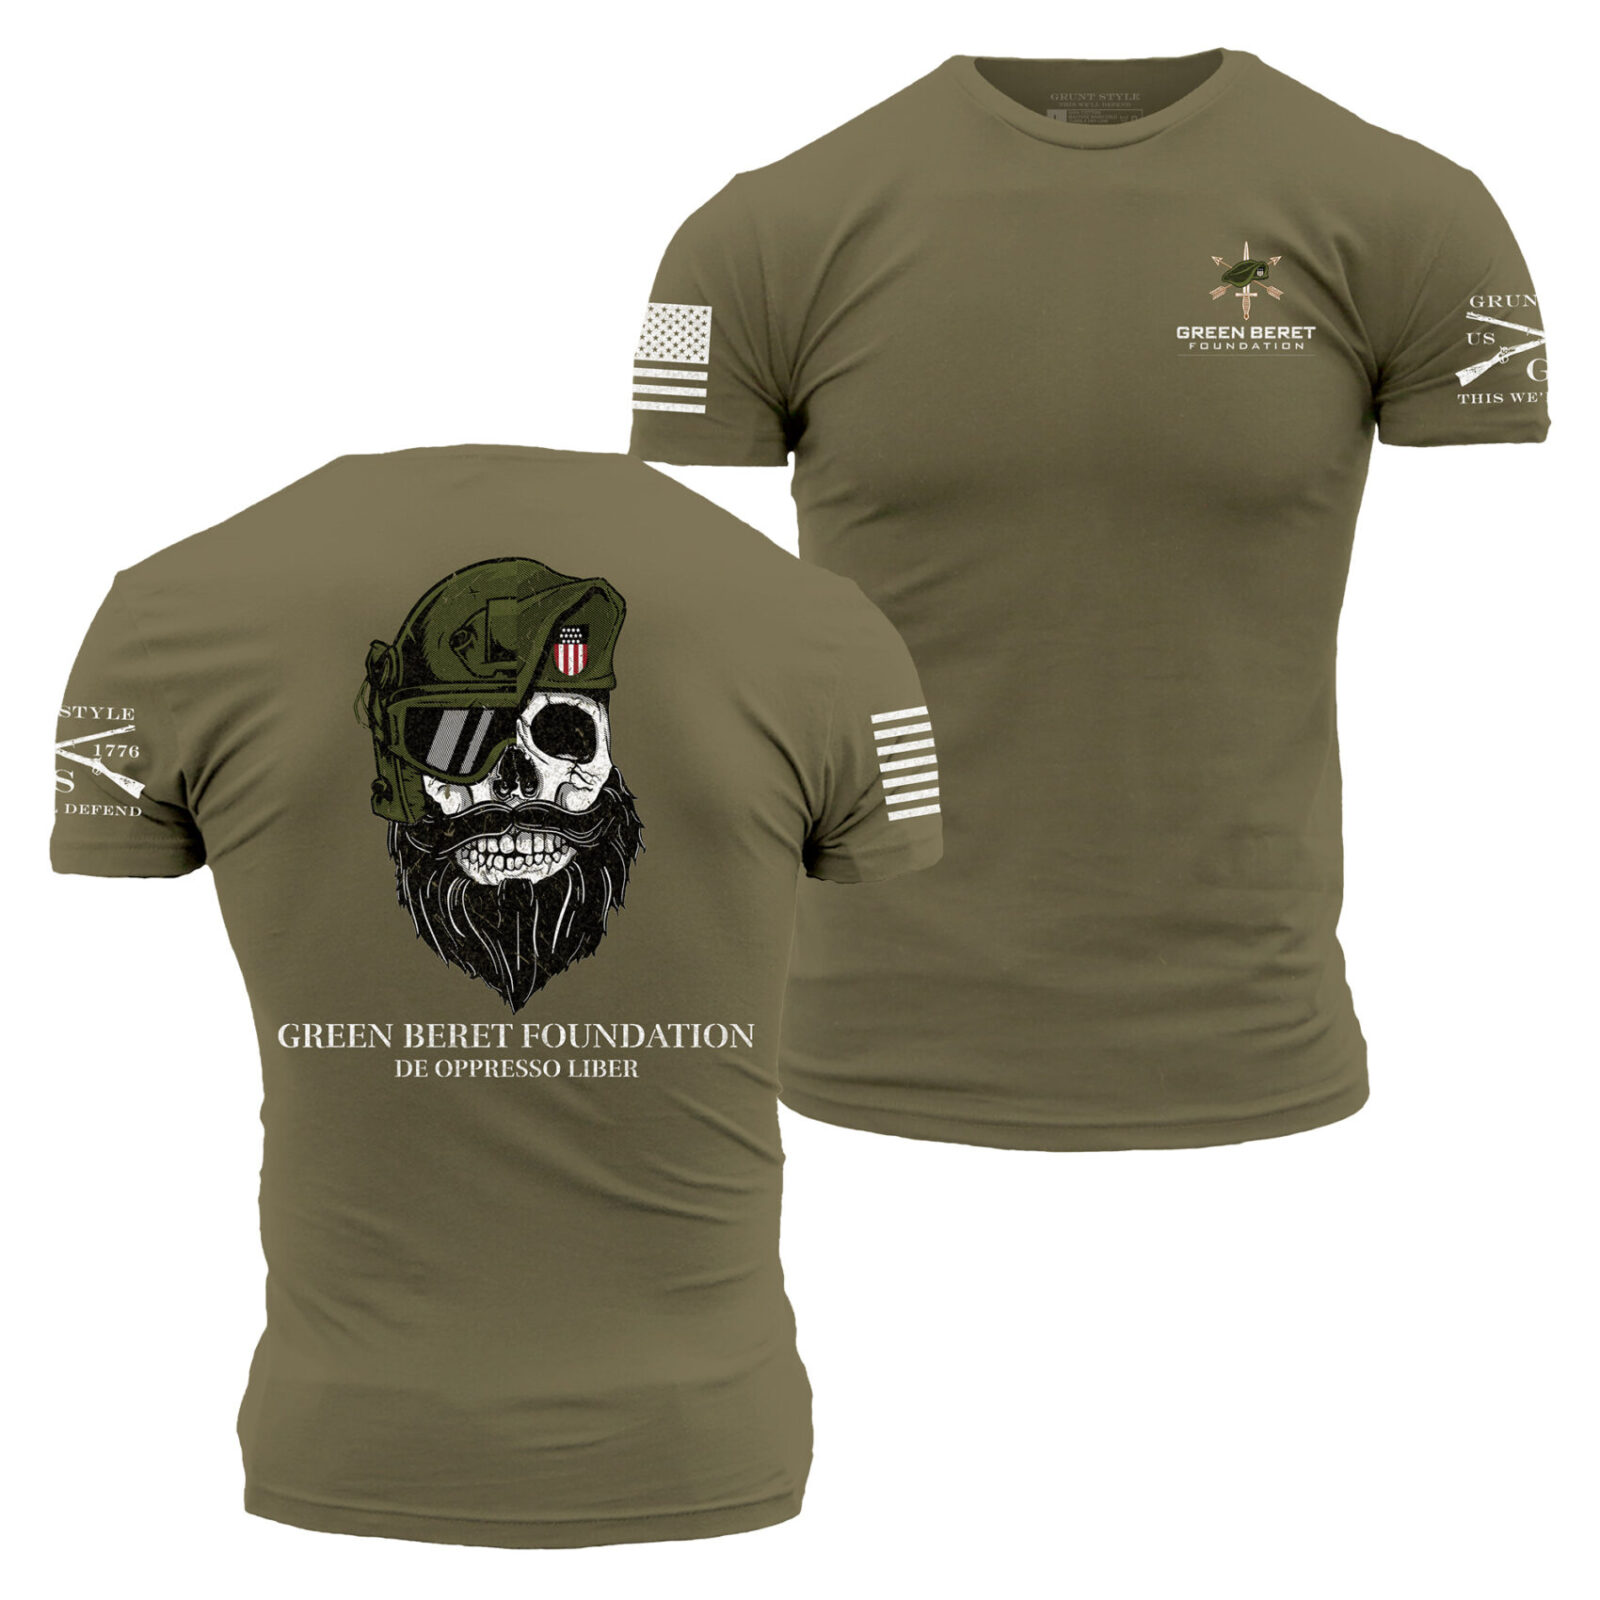 Grunt Style Apparel Collaboration with the Green Beret Foundation